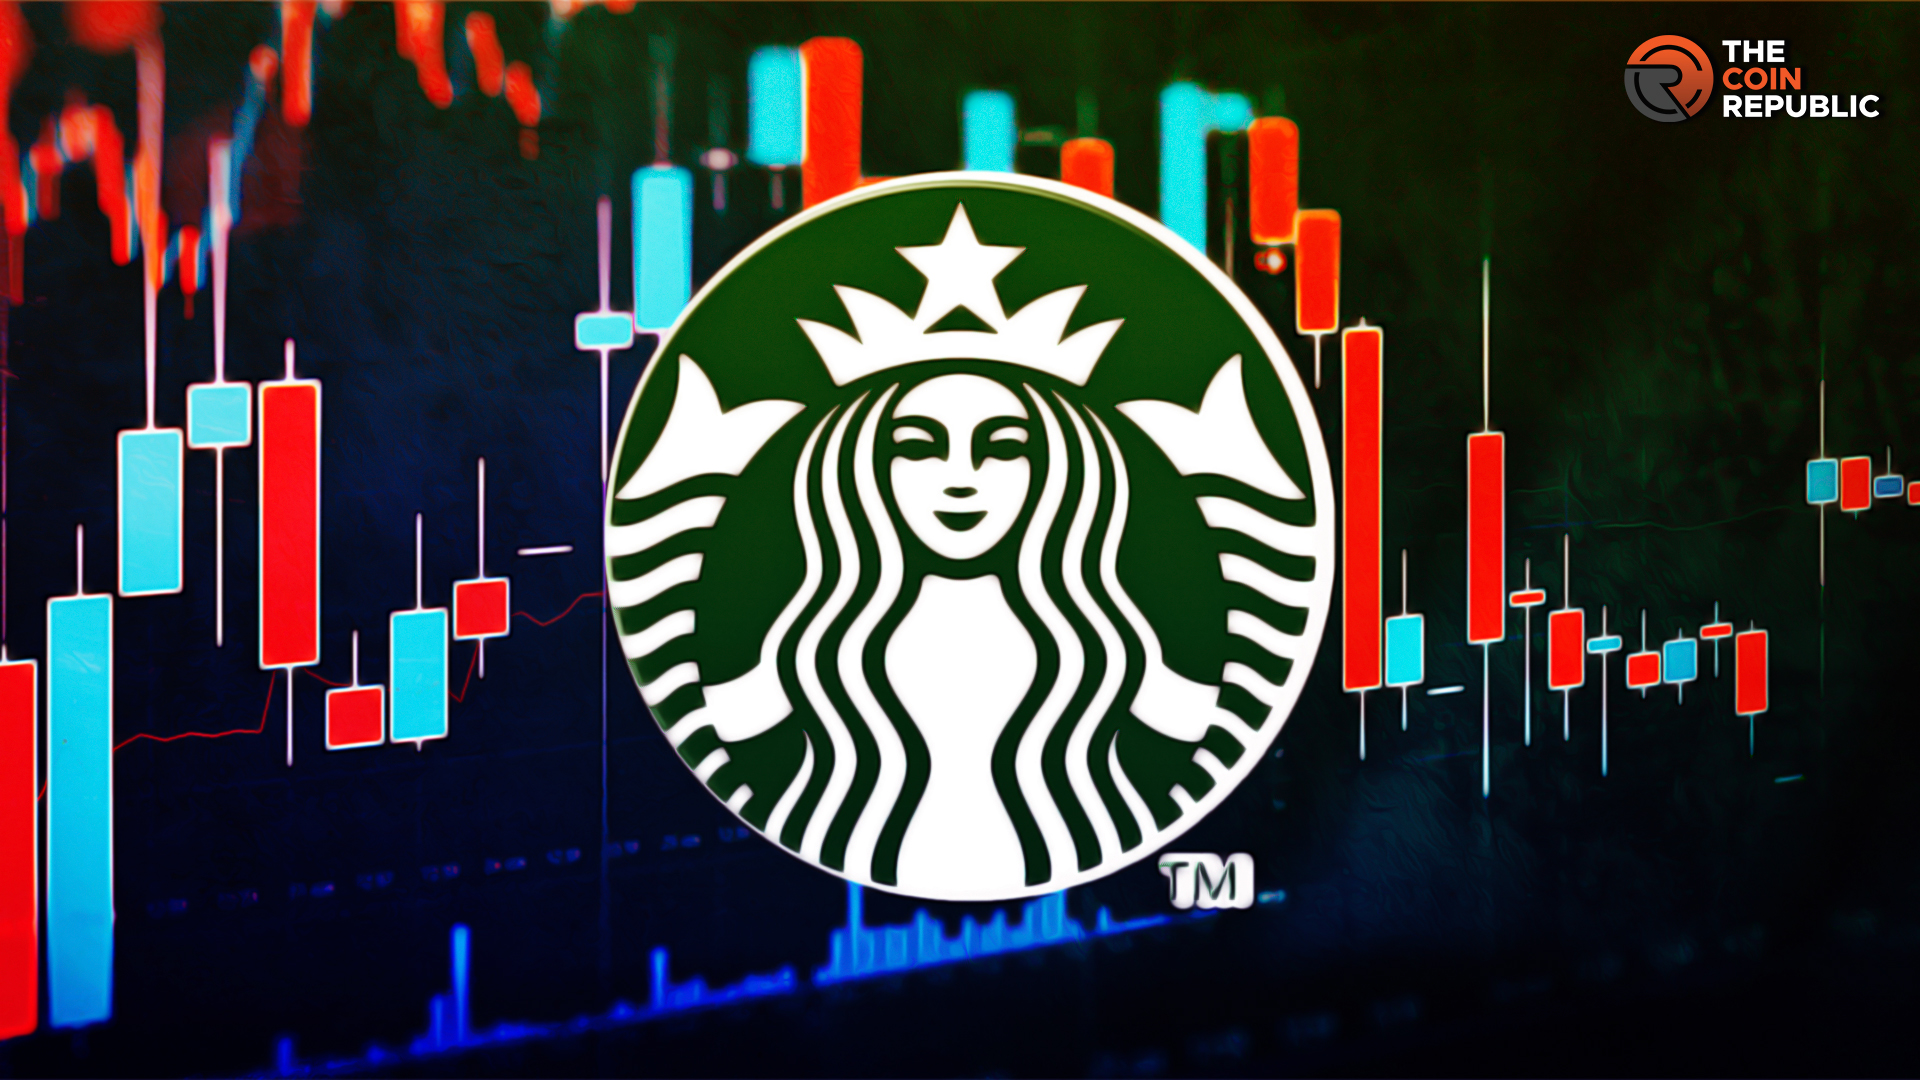 Starbucks Stock: Will SBUX Stock Bounce Back From the $93 Level?